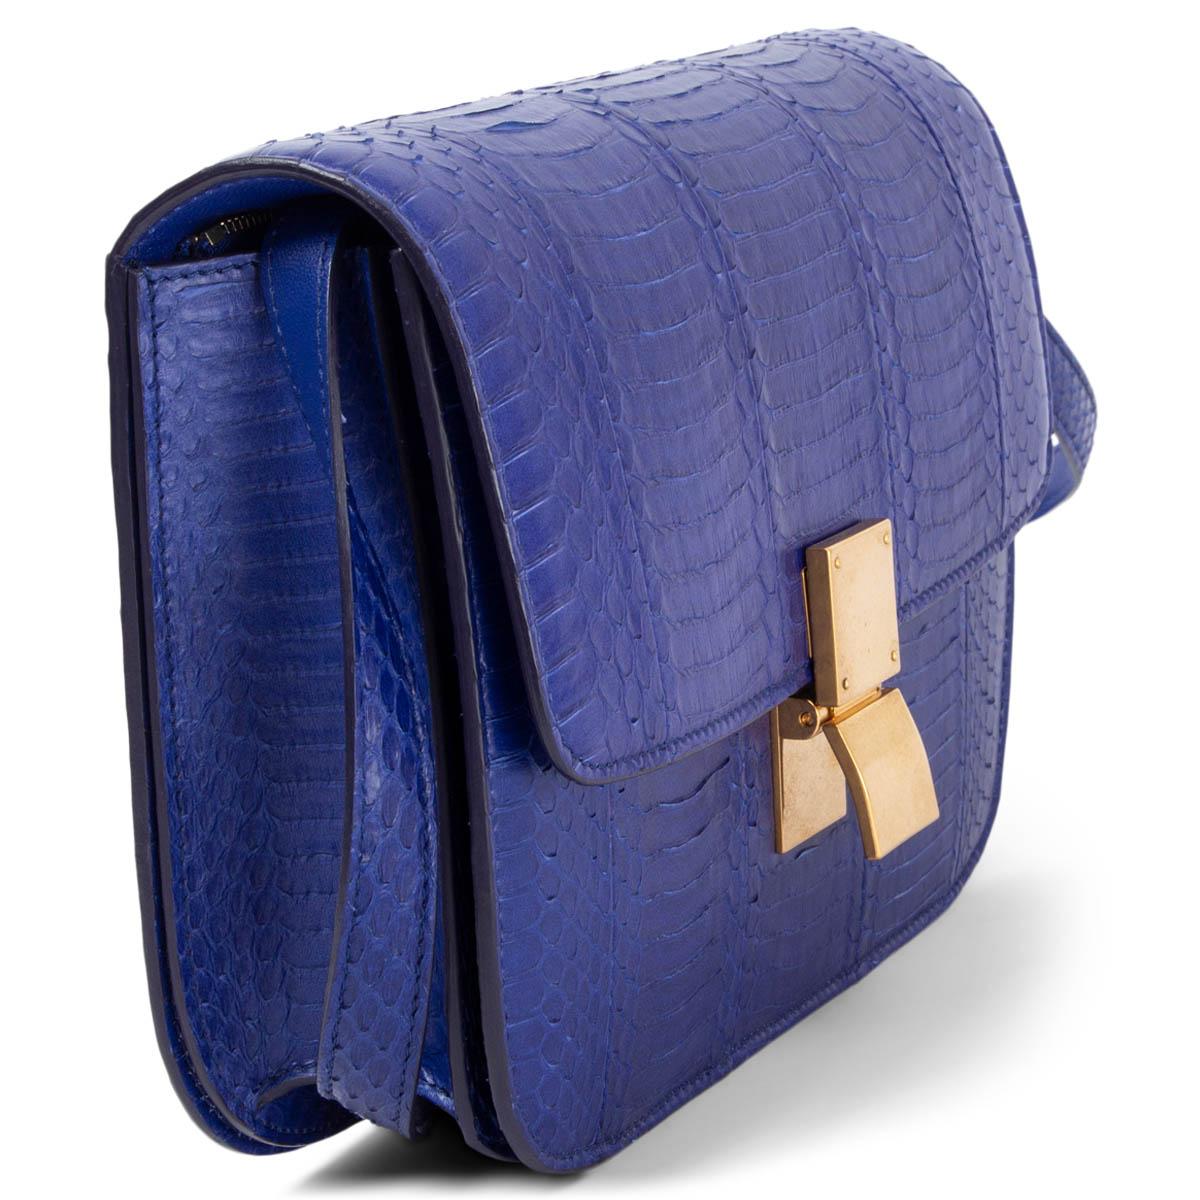 100% authentic Céline Medium Classic Bag in Indigo (purple blue) pithon featuring gold-tone hardware. Opens with a push-lock on the front. The inside is divided into two compartments with two open pockets against the front and a zipper pocket